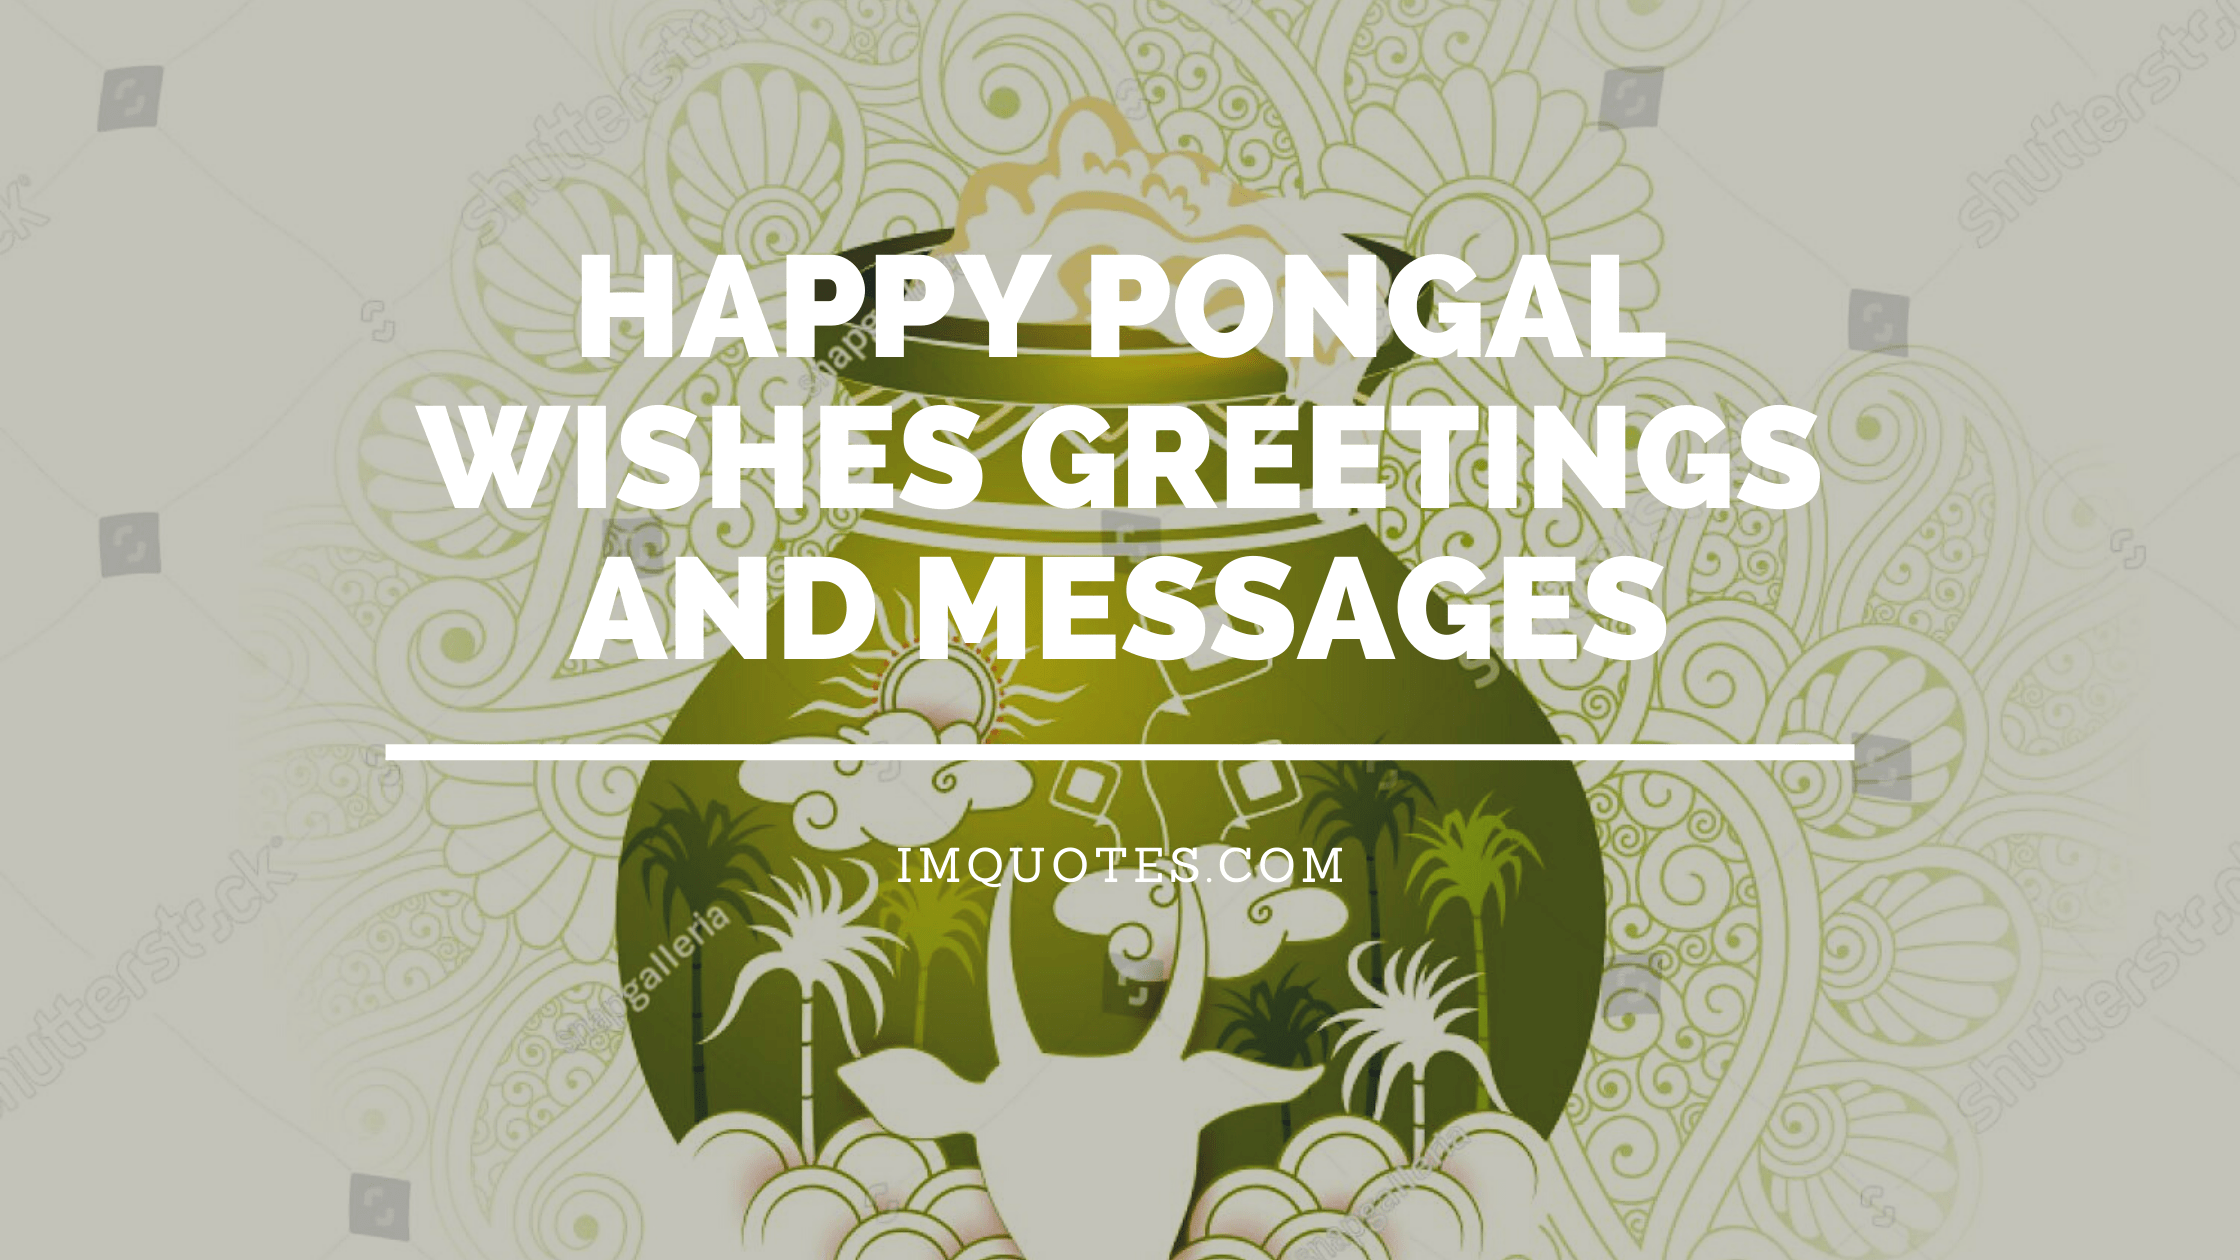 Happy Pongal Wishes Greetings And Messages